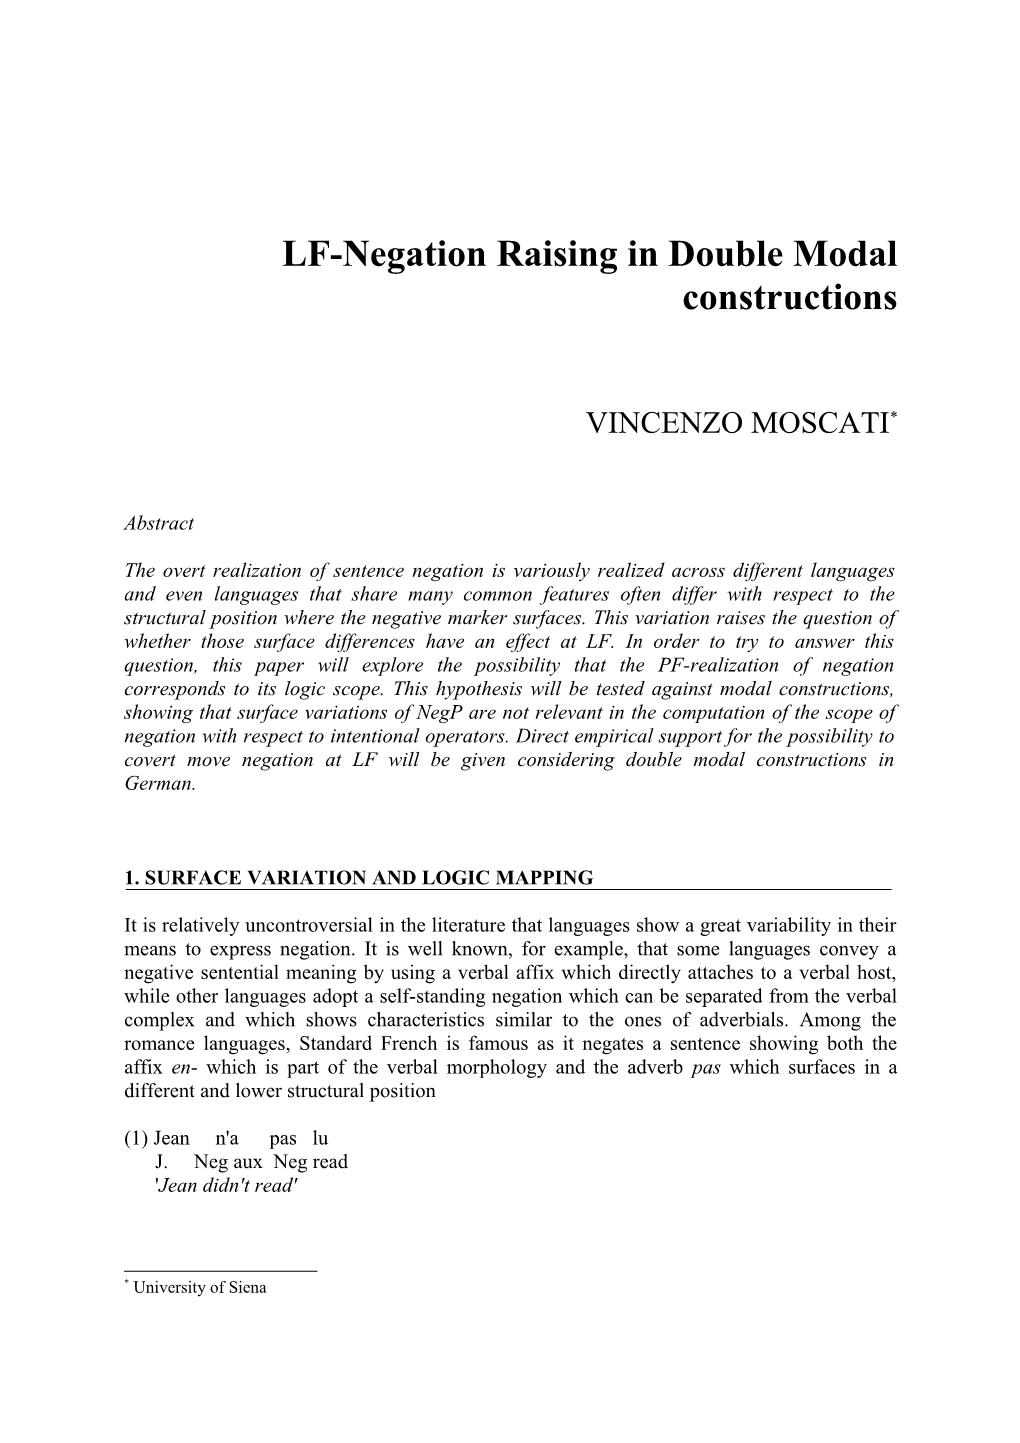 LF-Negation Raising in Double Modal Constructions